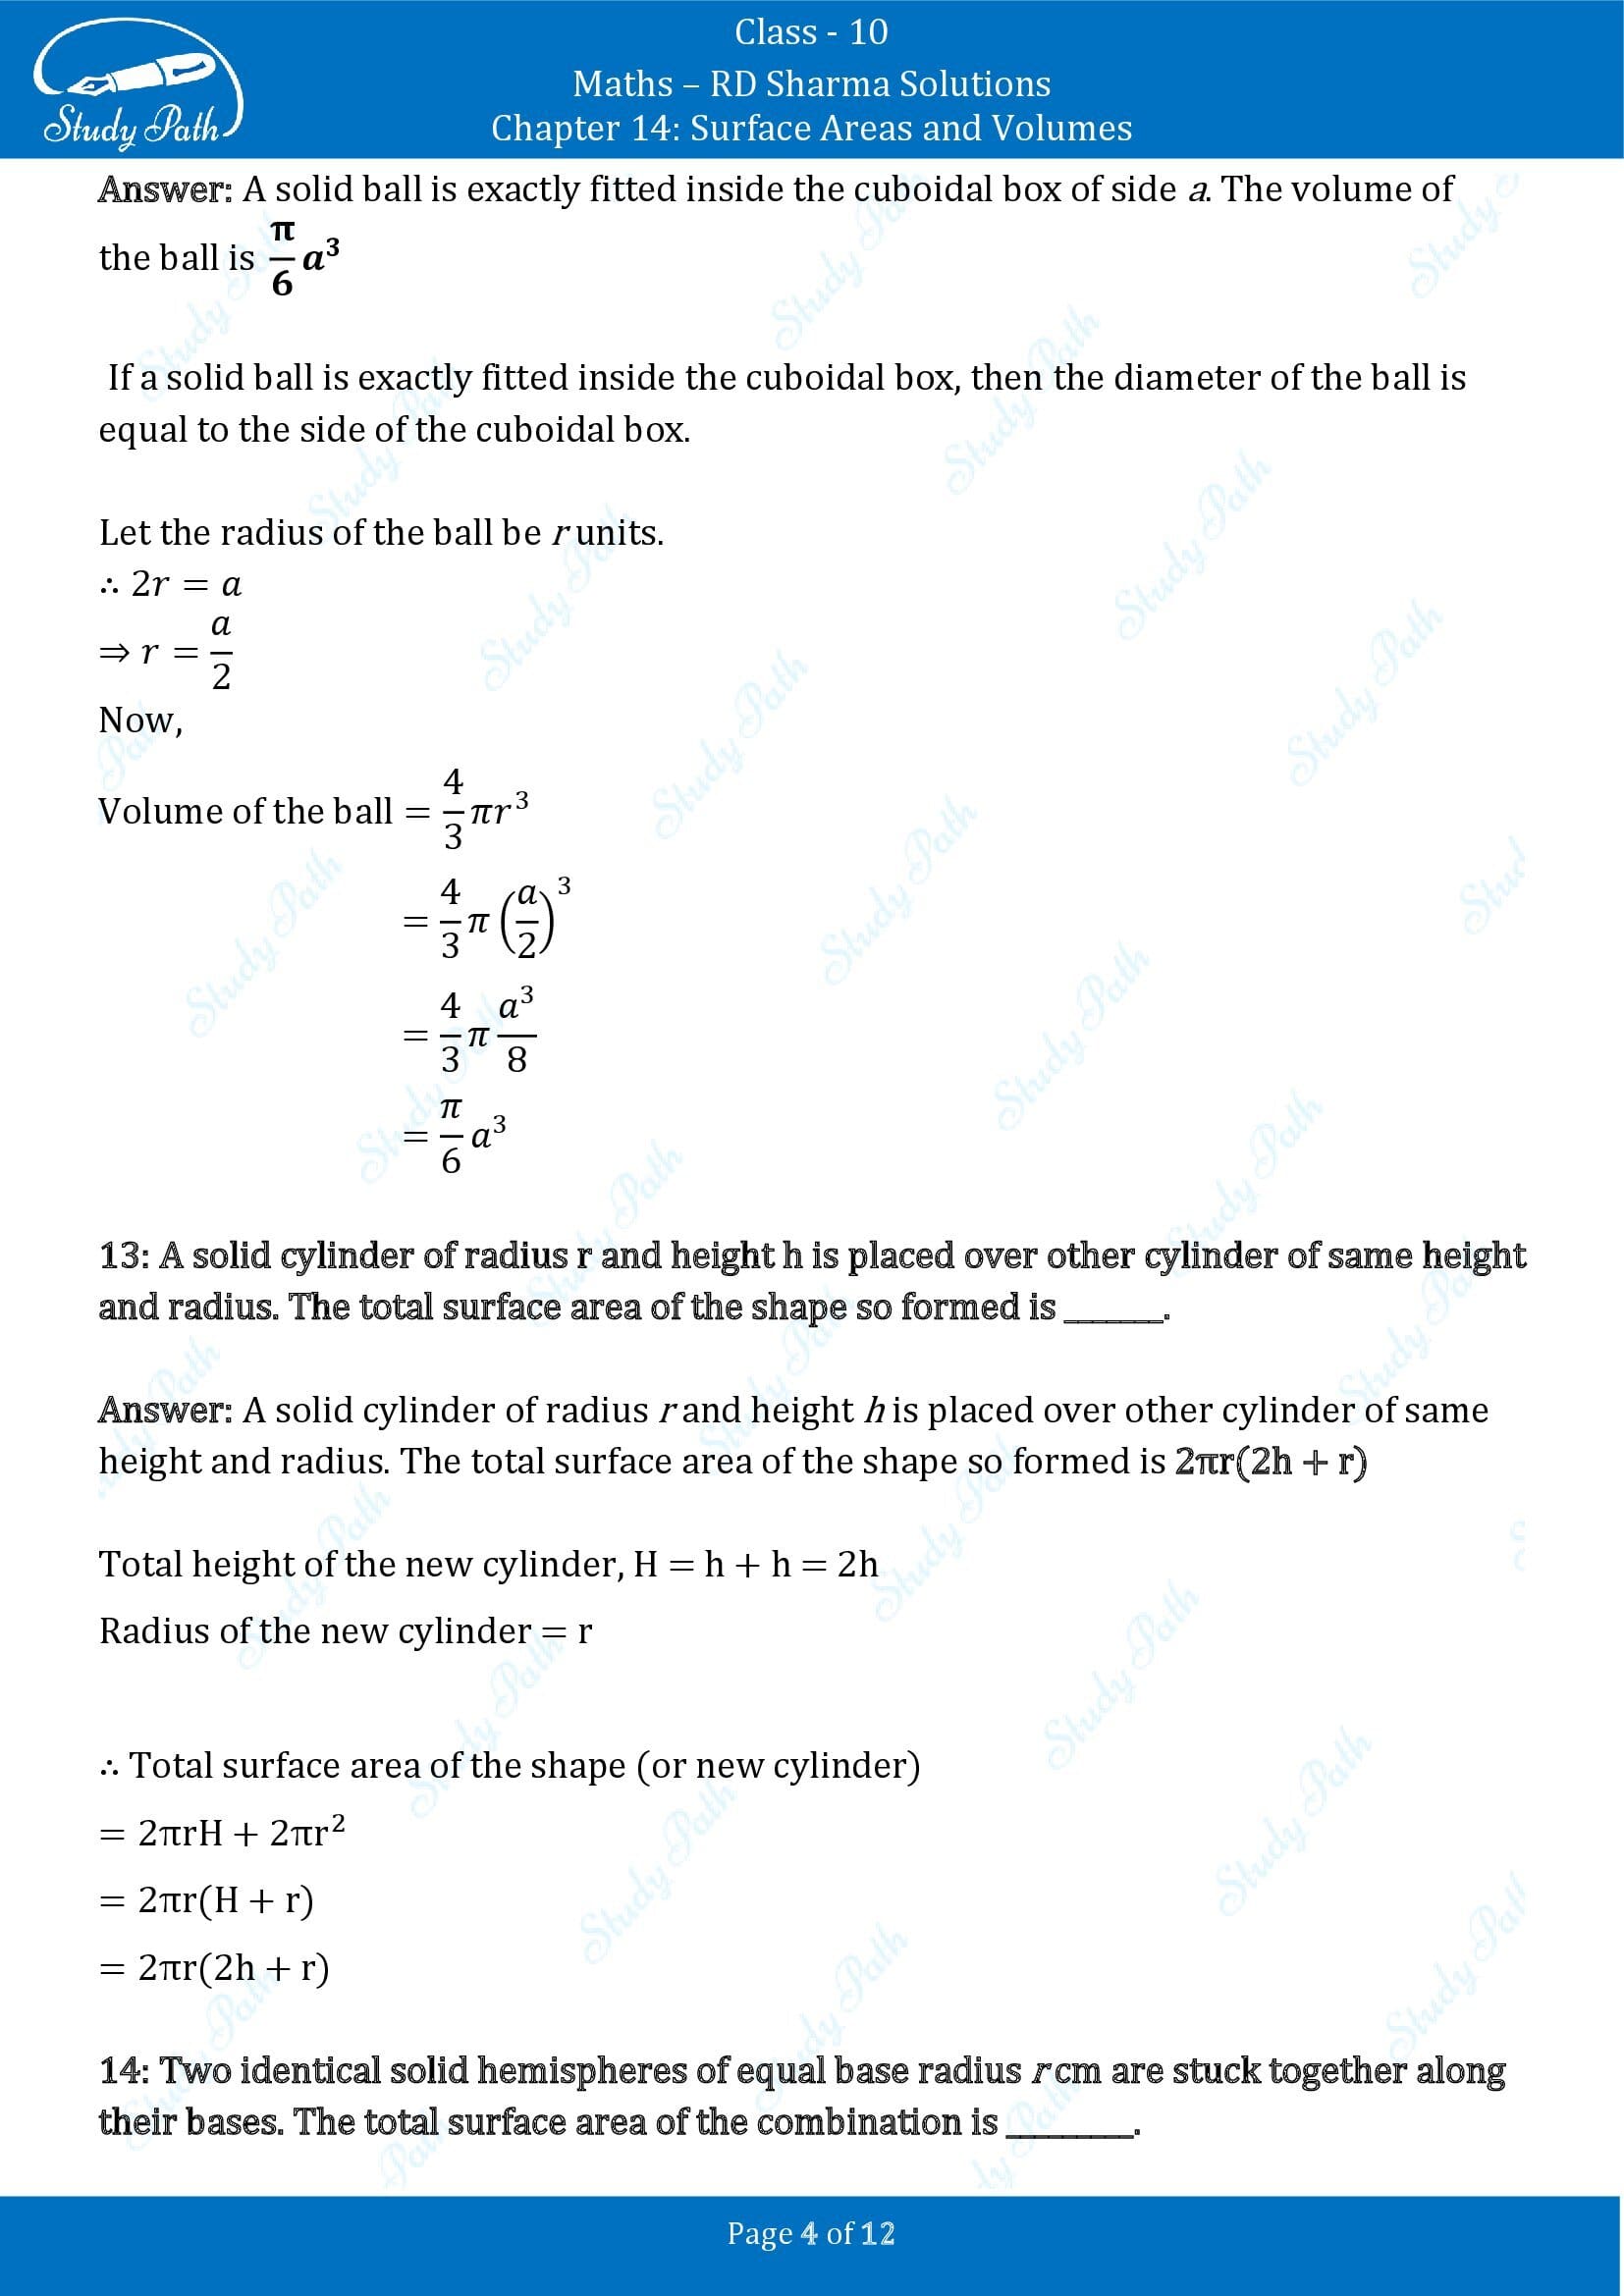 RD Sharma Solutions Class 10 Chapter 14 Surface Areas and Volumes Fill in the Blank Type Questions FBQs 00004